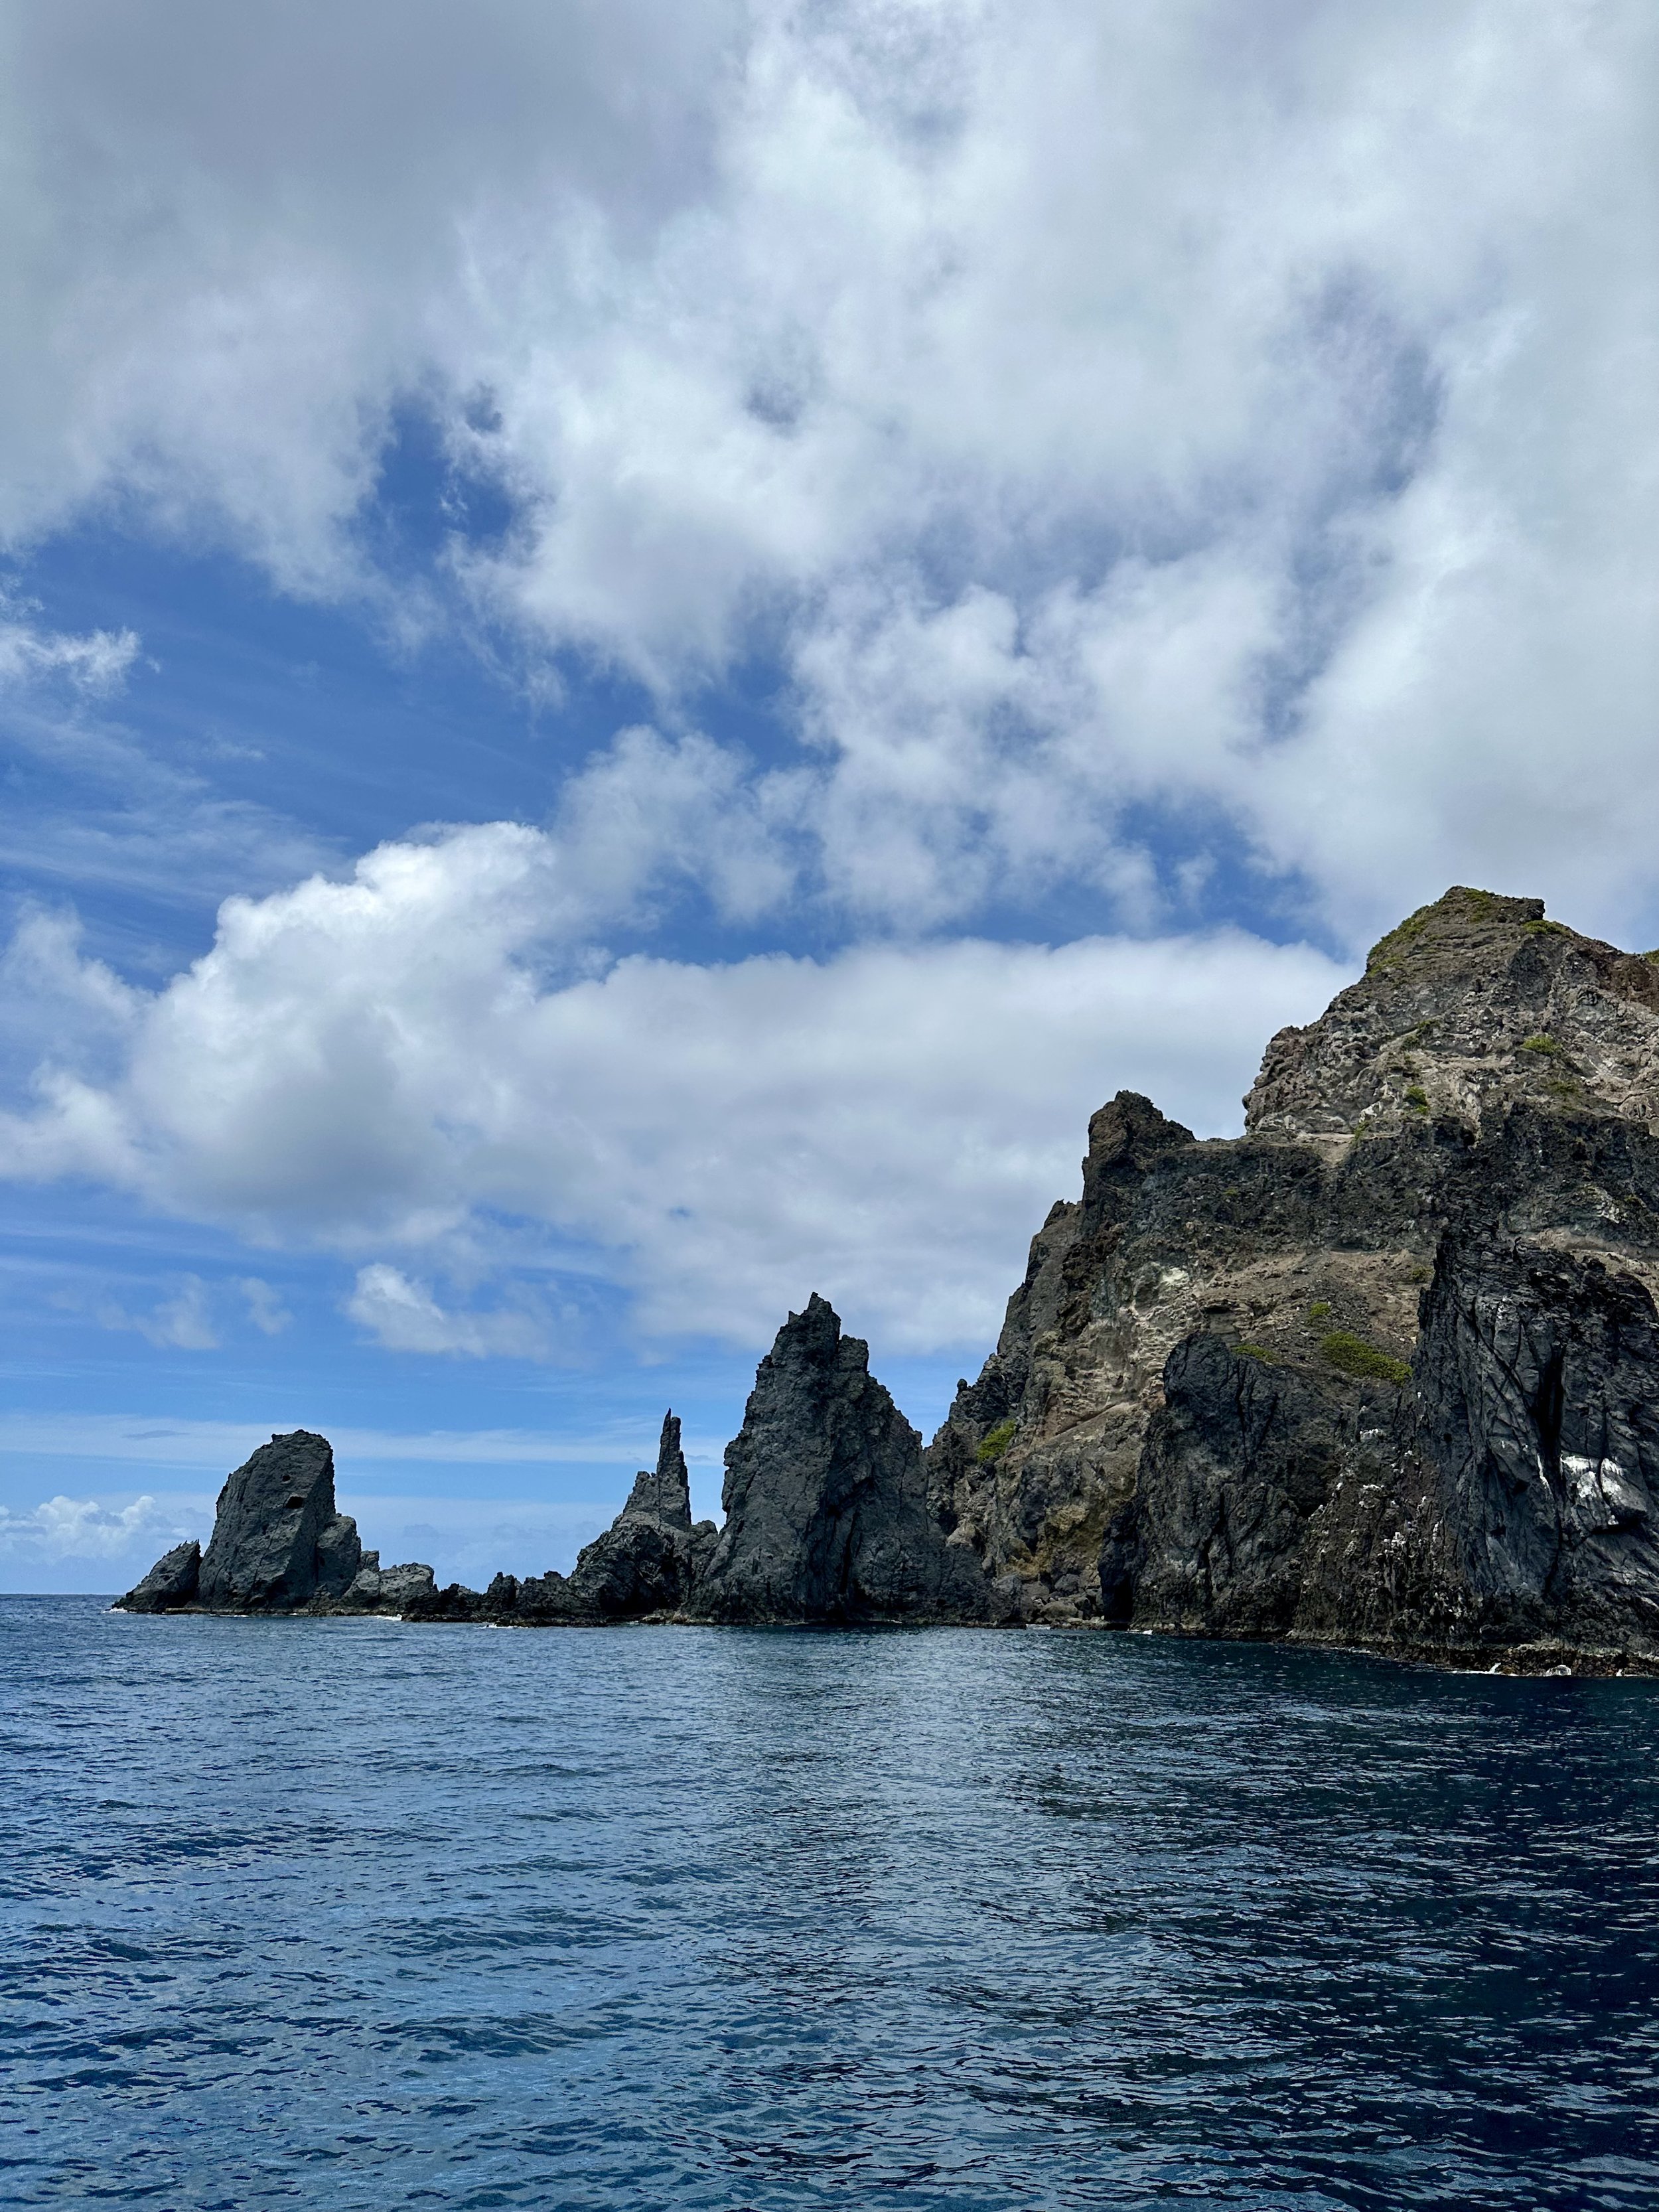 Dramatic rock formations abound off the coast of Saba.jpeg